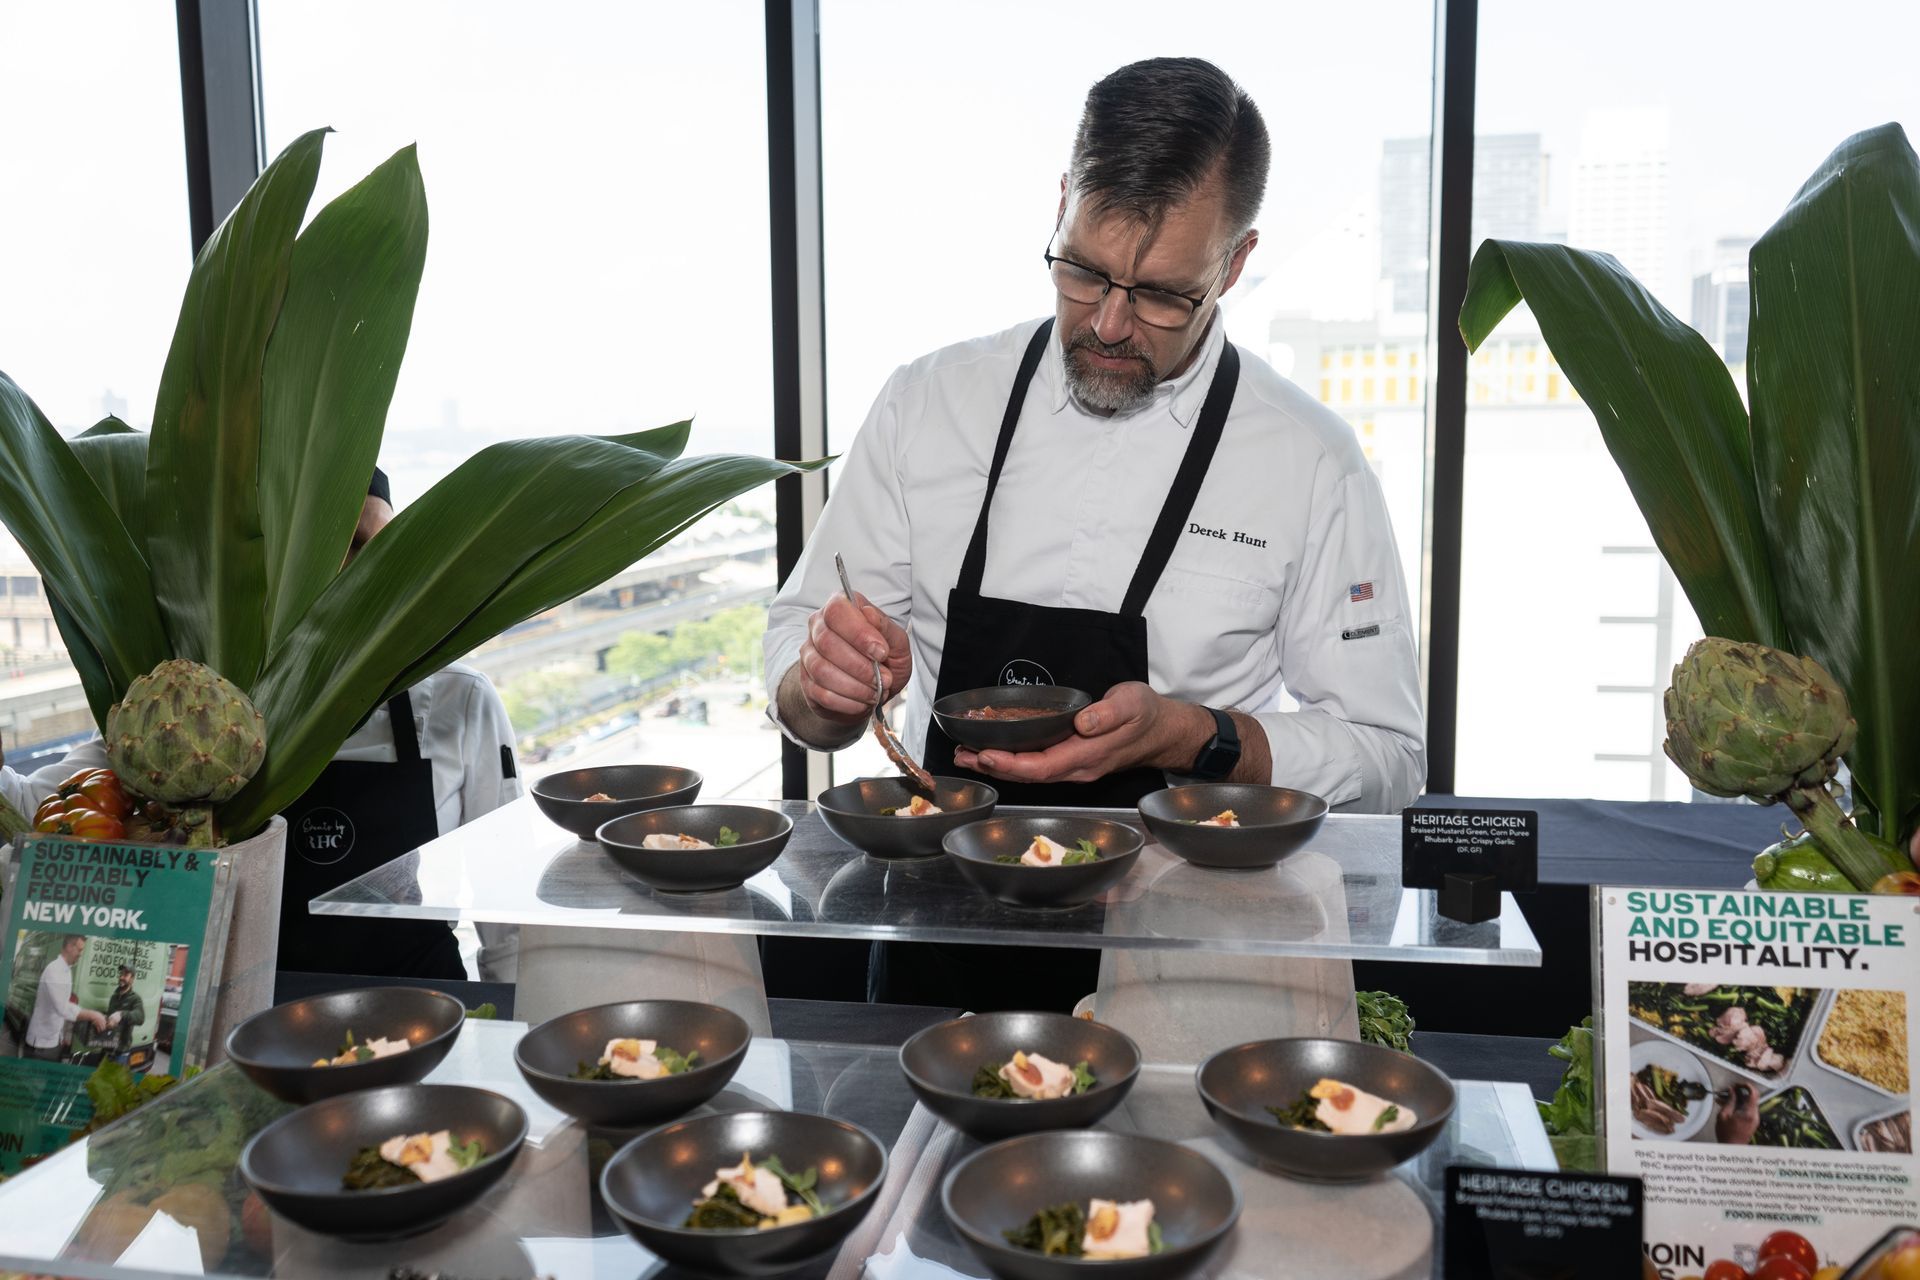 A chef is preparing food on a table in front of a window.